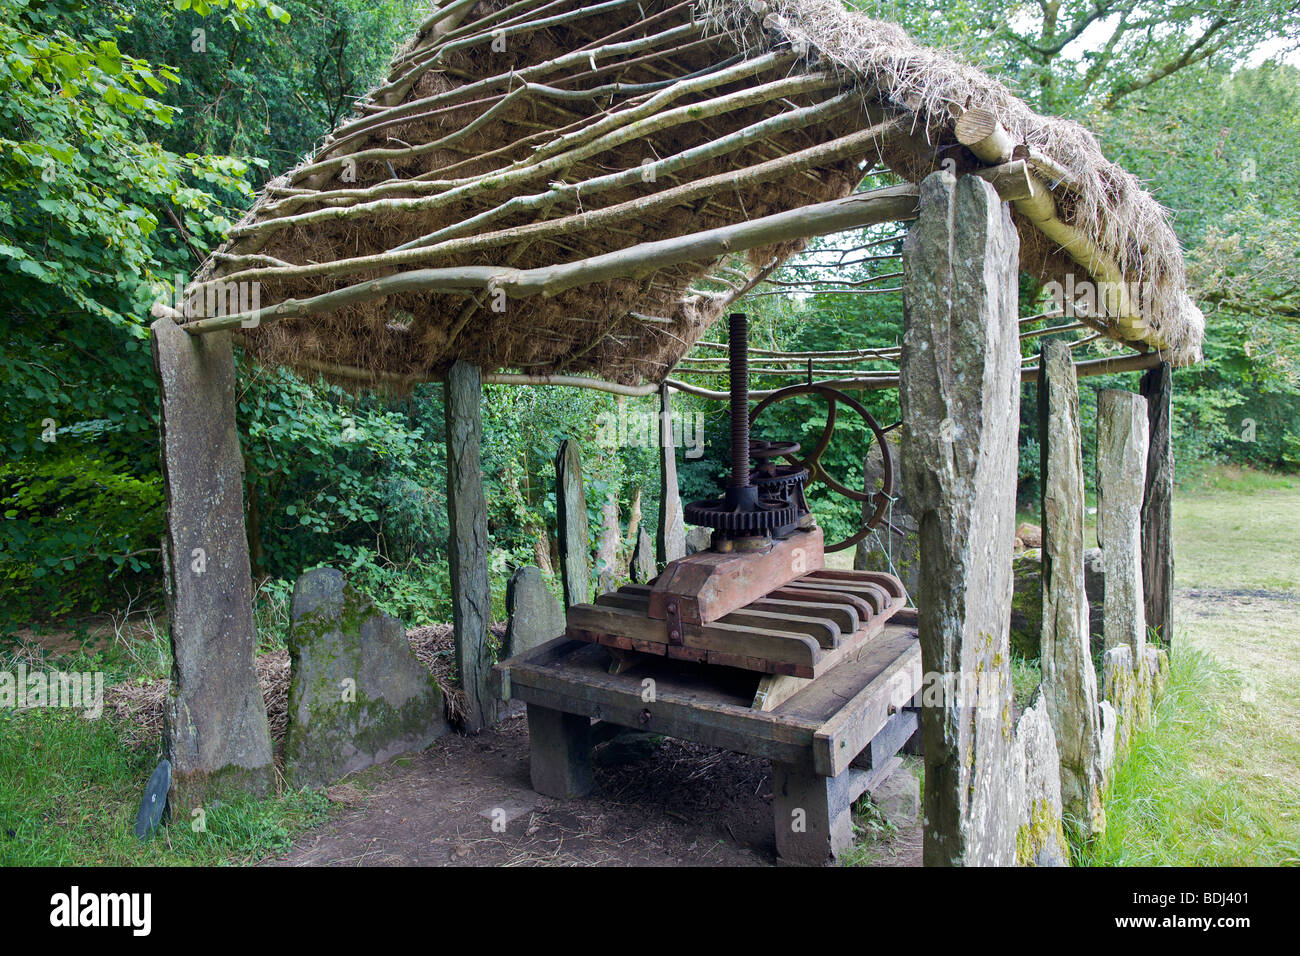 Maison Cornec or Cornec House, one of the first eco-museums in France. A standing stone grange housing a cider press. Stock Photo